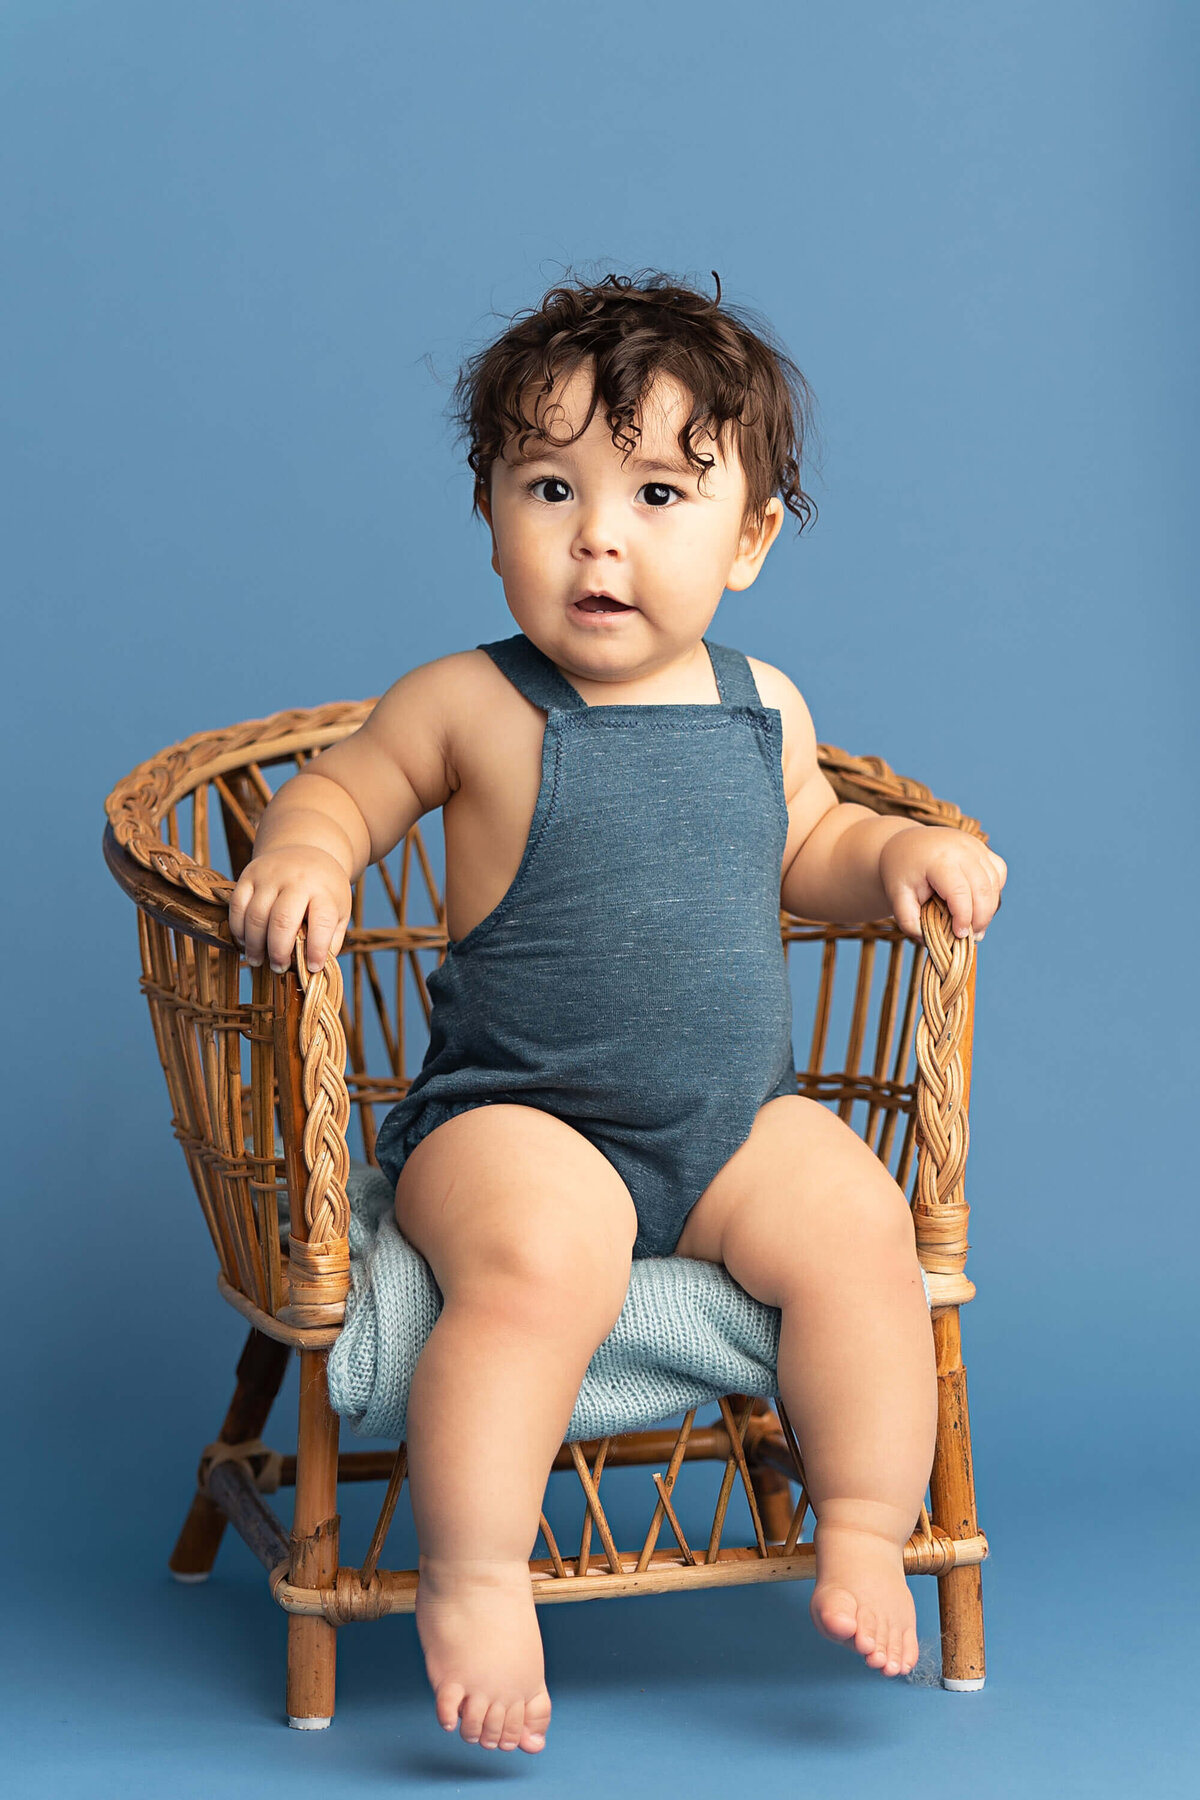 baby boy wearing blue overalls and in a chair looking serious with his adorable curly brown hair. Taken by portland photographer Ann Marshall